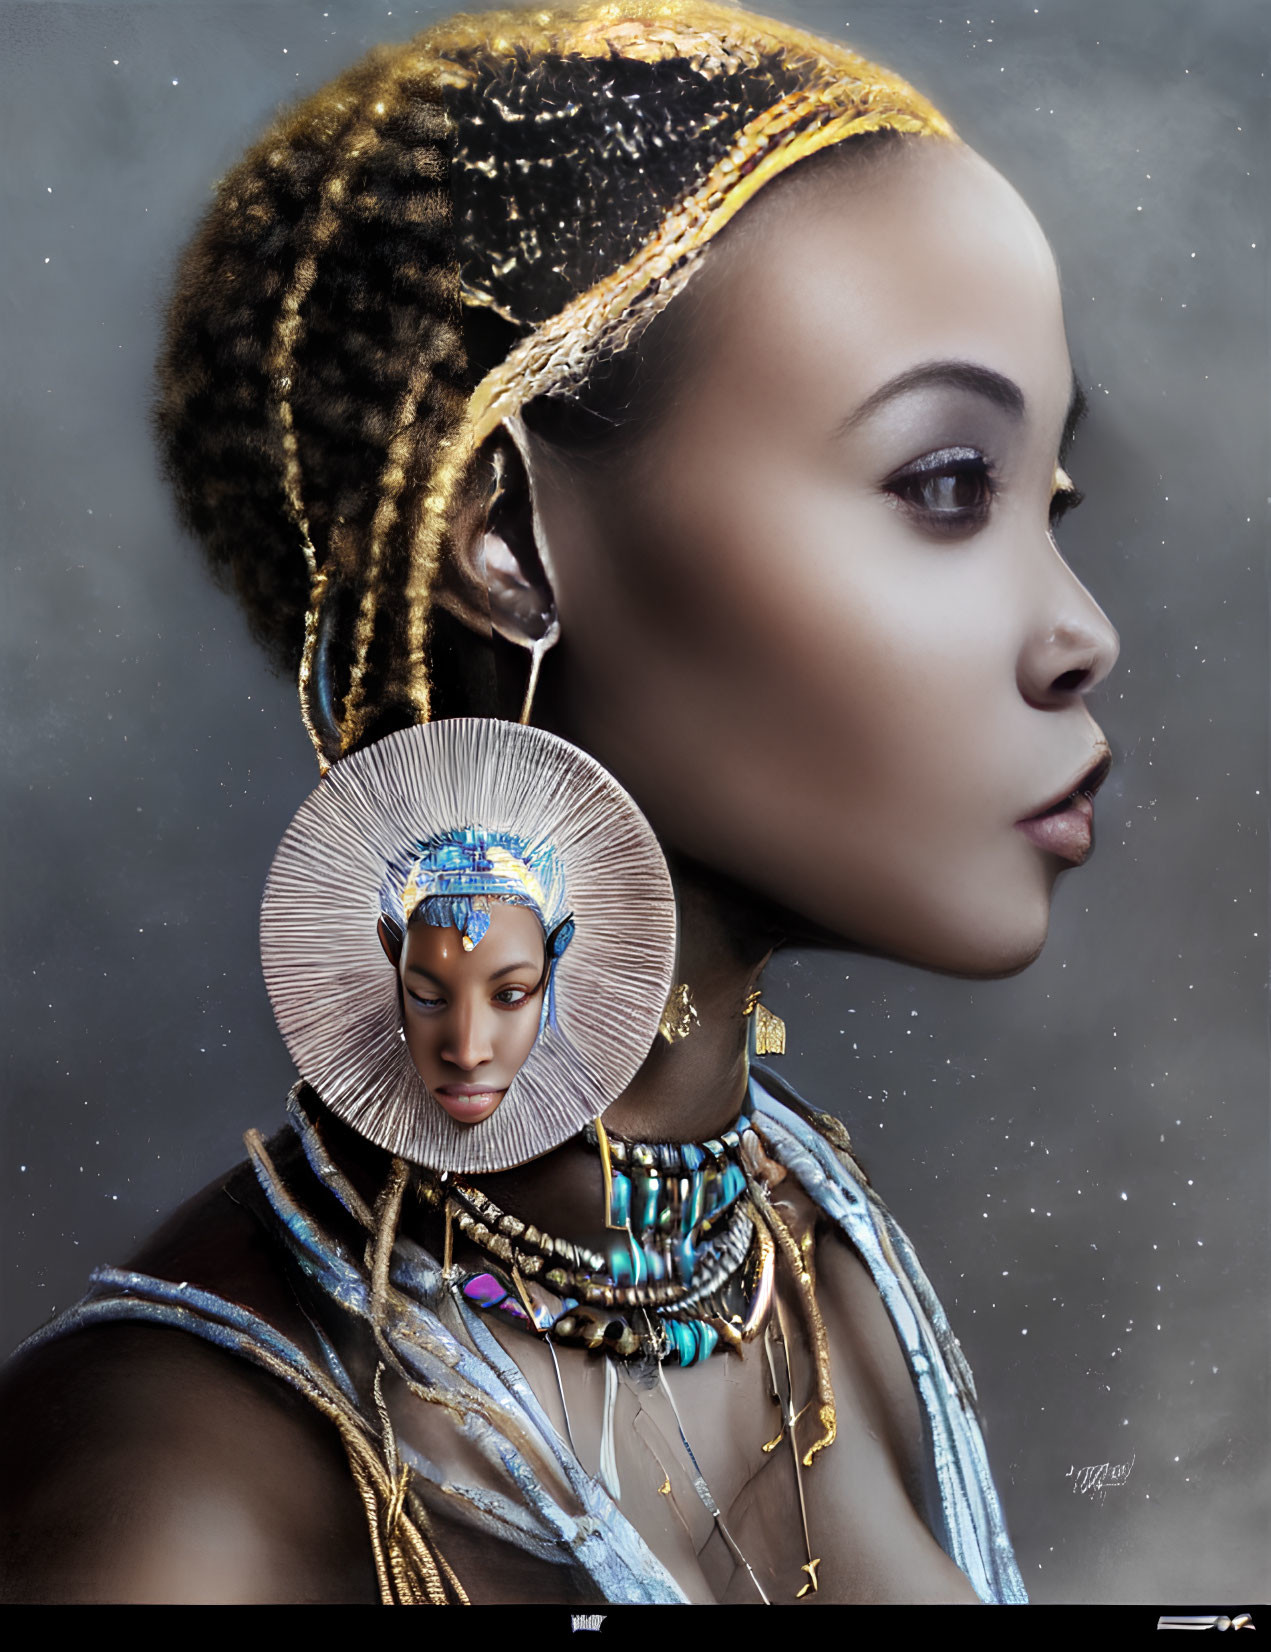 Detailed digital portrait of African woman with intricate hair braids, circular earring, necklaces, and